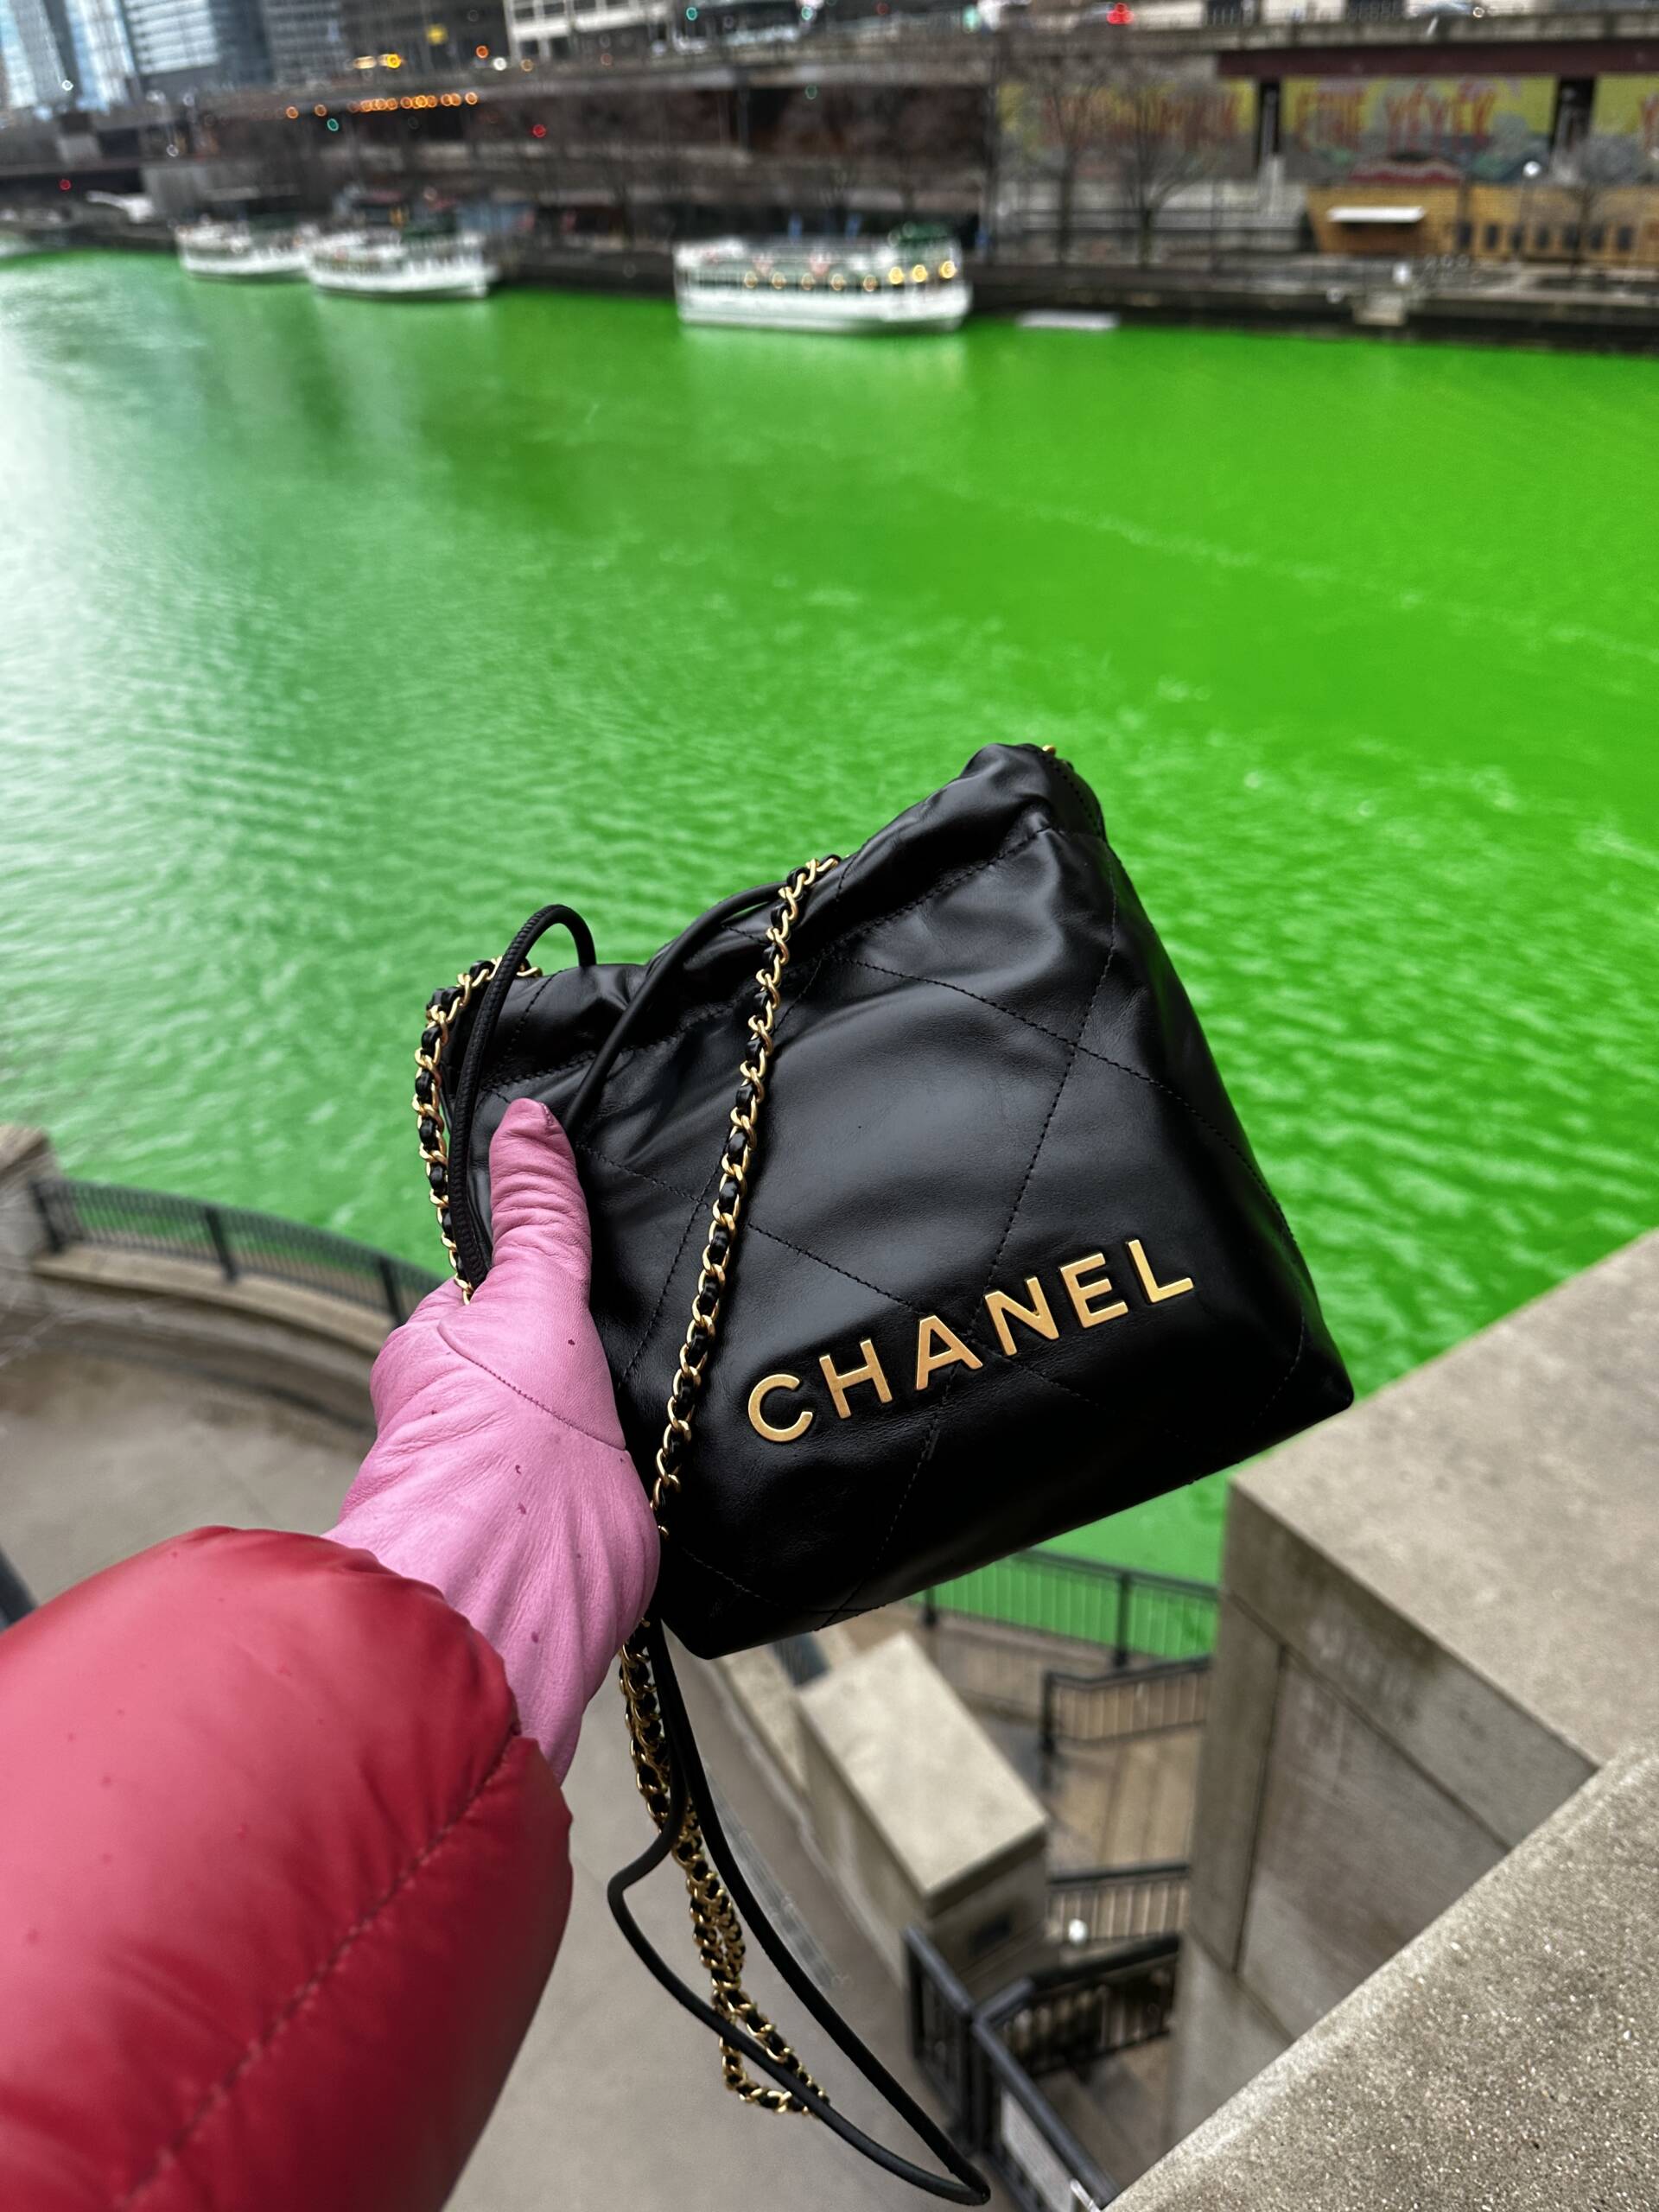 CHANEL VIP GIFT 2023 UNBOXING, HOW TO BECOME A CHANEL VIP?